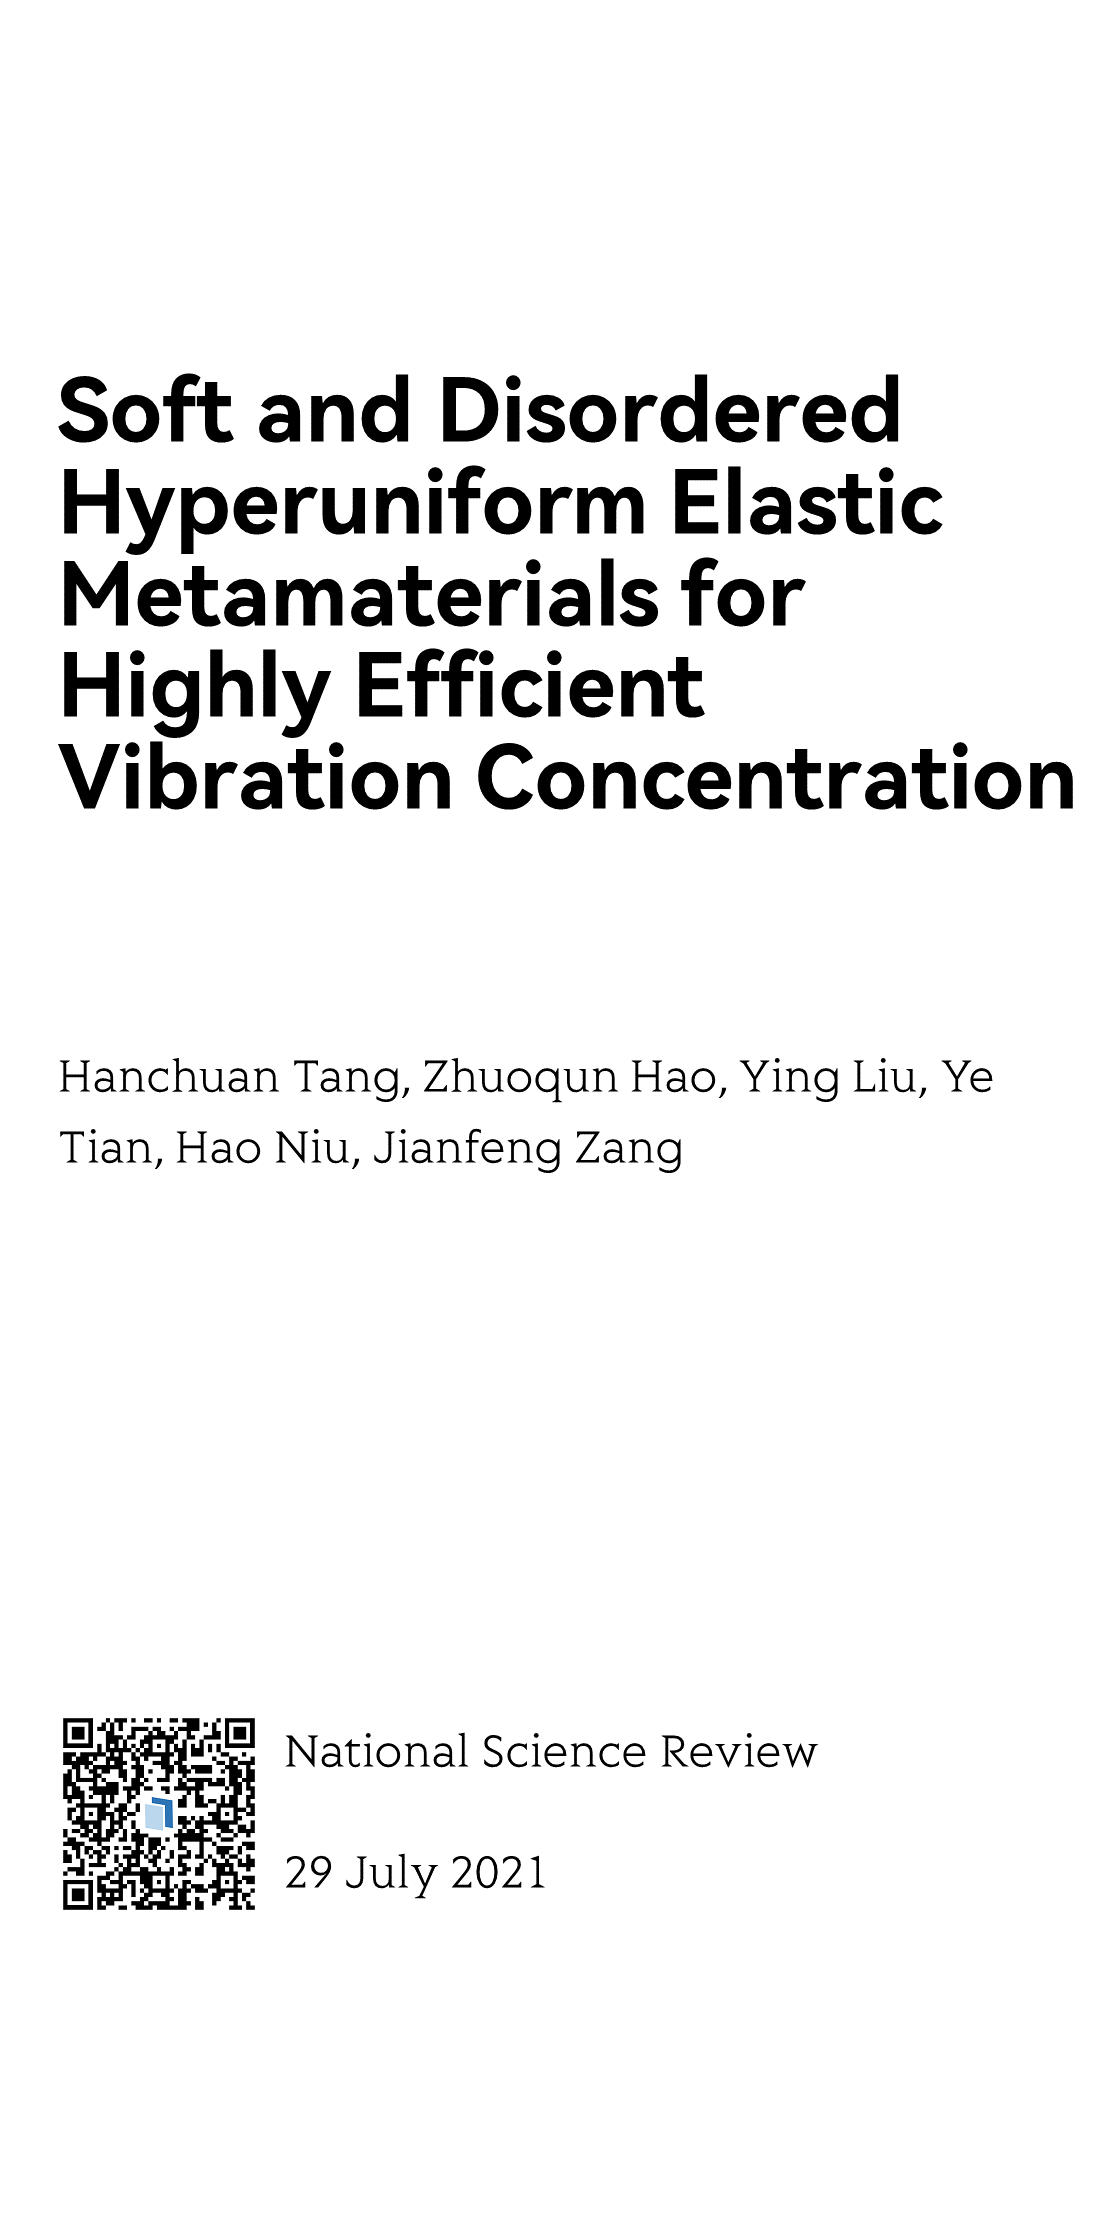 Soft and Disordered Hyperuniform Elastic Metamaterials for Highly Efficient Vibration Concentration_1